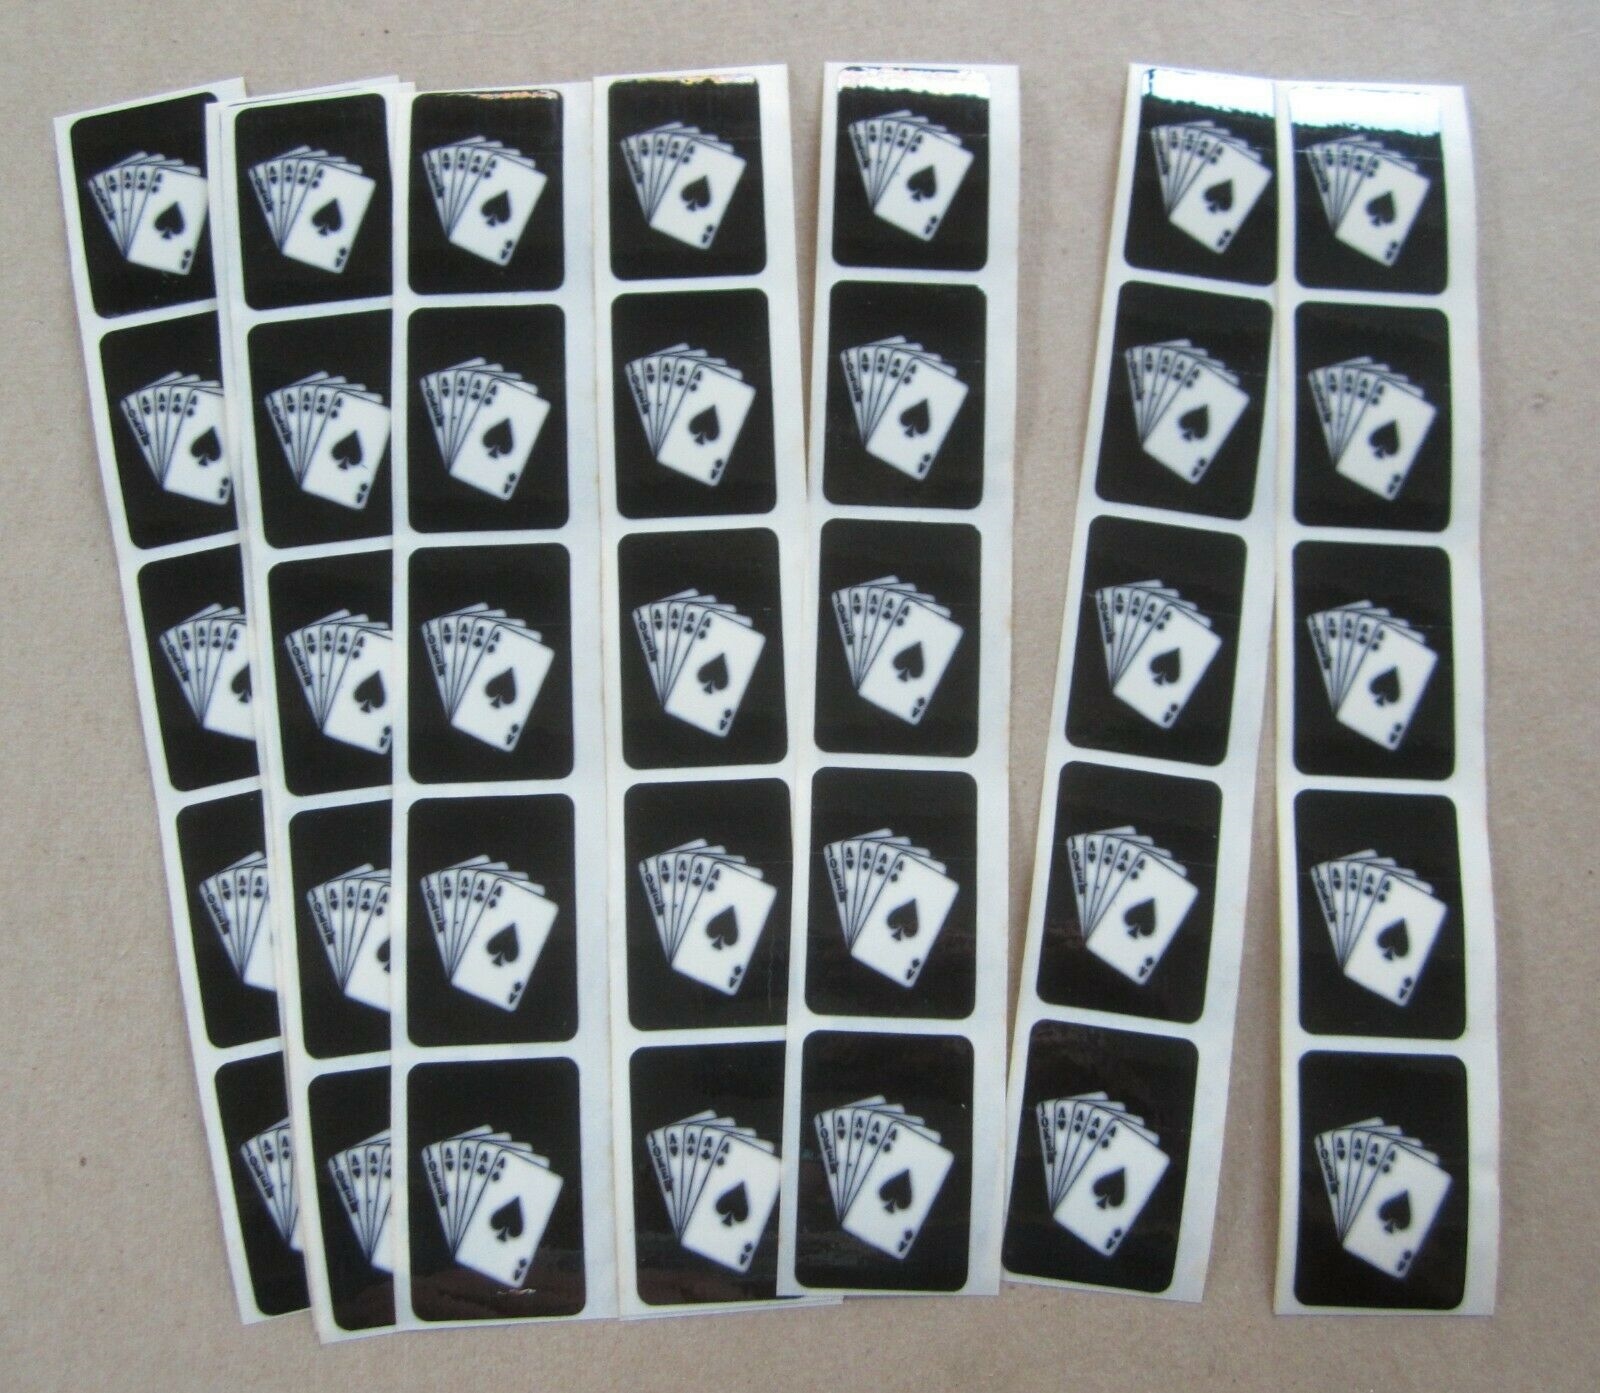  Lot of 50 Old Vintage - ZIPPO LIGHTER Stickers...